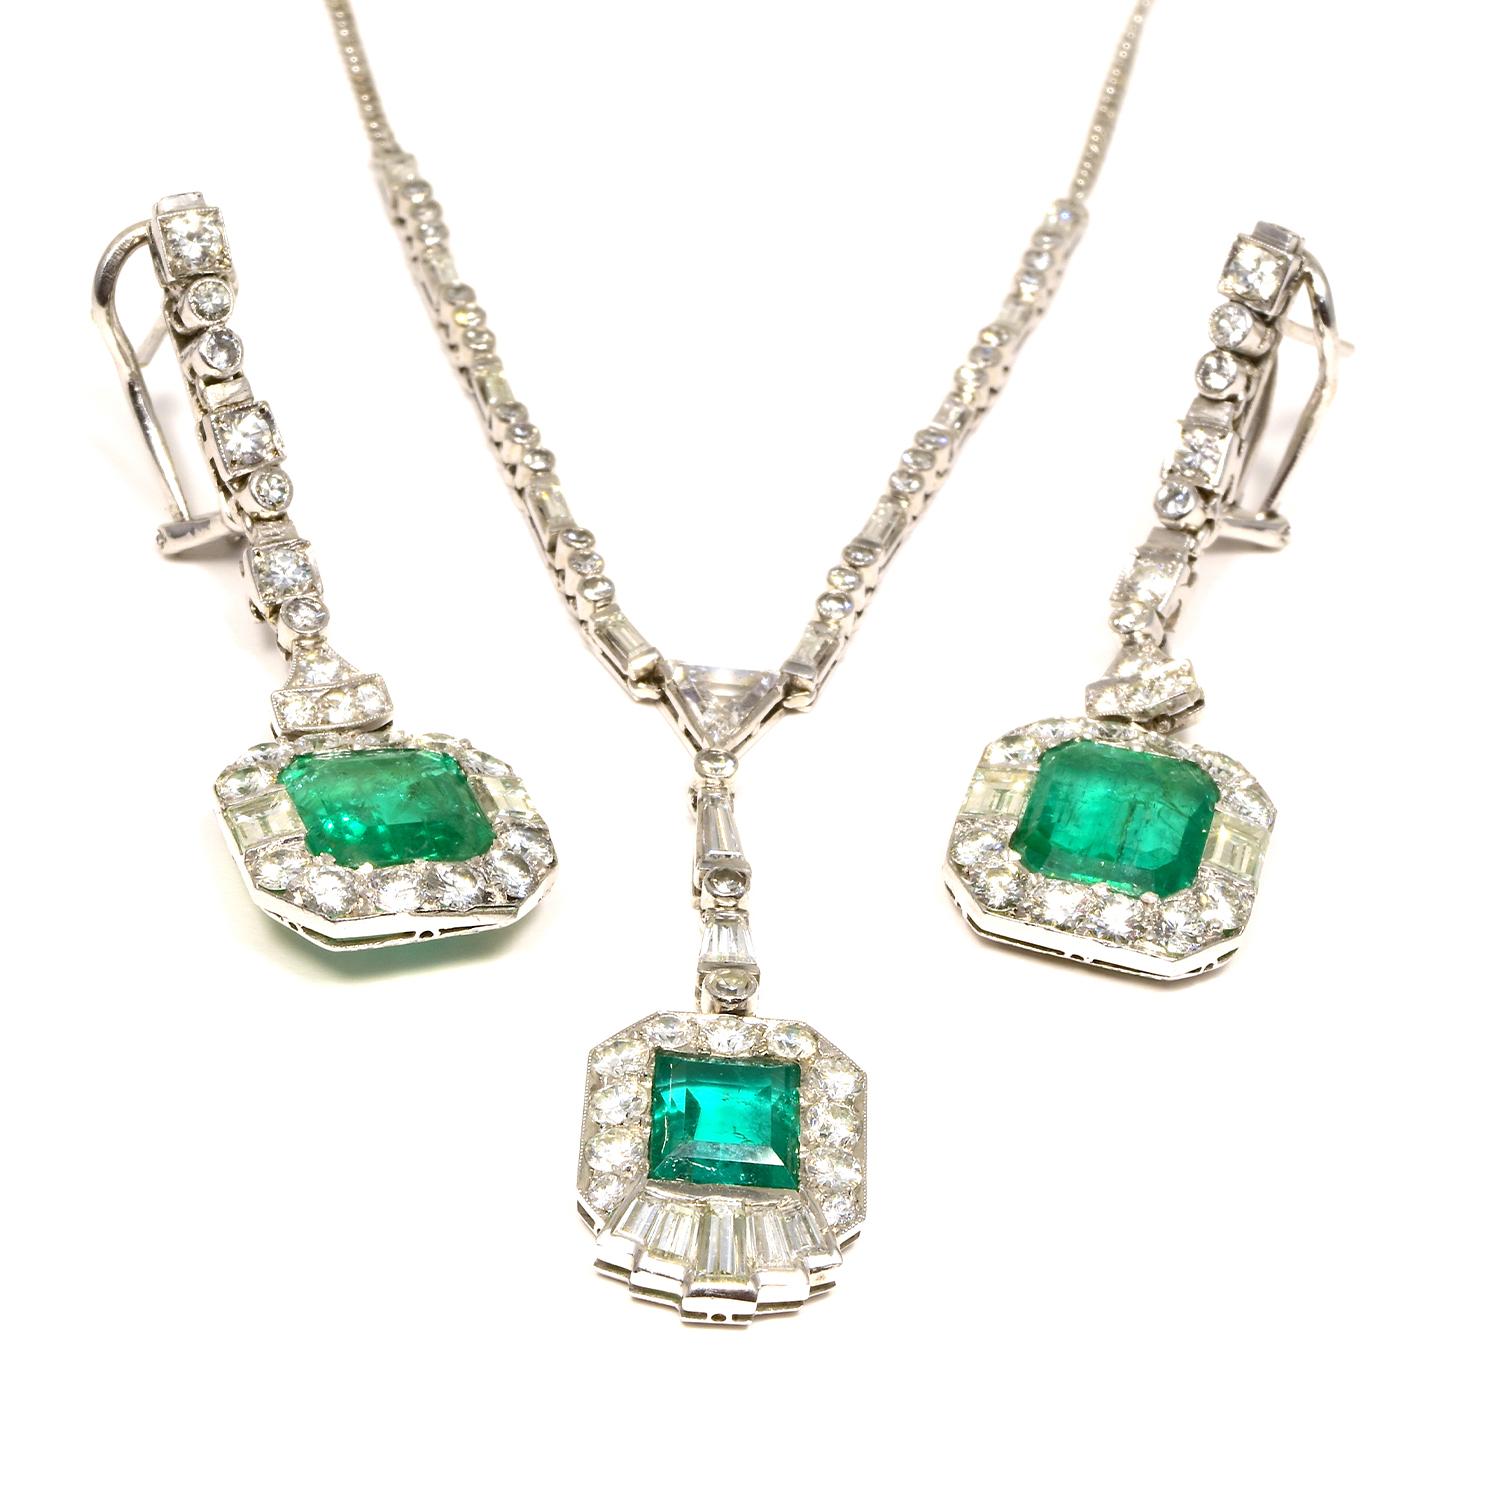 Style: Diamond and Emerald earring and necklace set 

Metal: Platinum

Metal Purity: 950

Necklace Stones: Diamonds, Emerald 

Necklace Weight: 12 grams 

Necklace length: 16 in

Earring  Stones: Diamonds, Emeralds 

Earring Emerald Carat Weight: 5